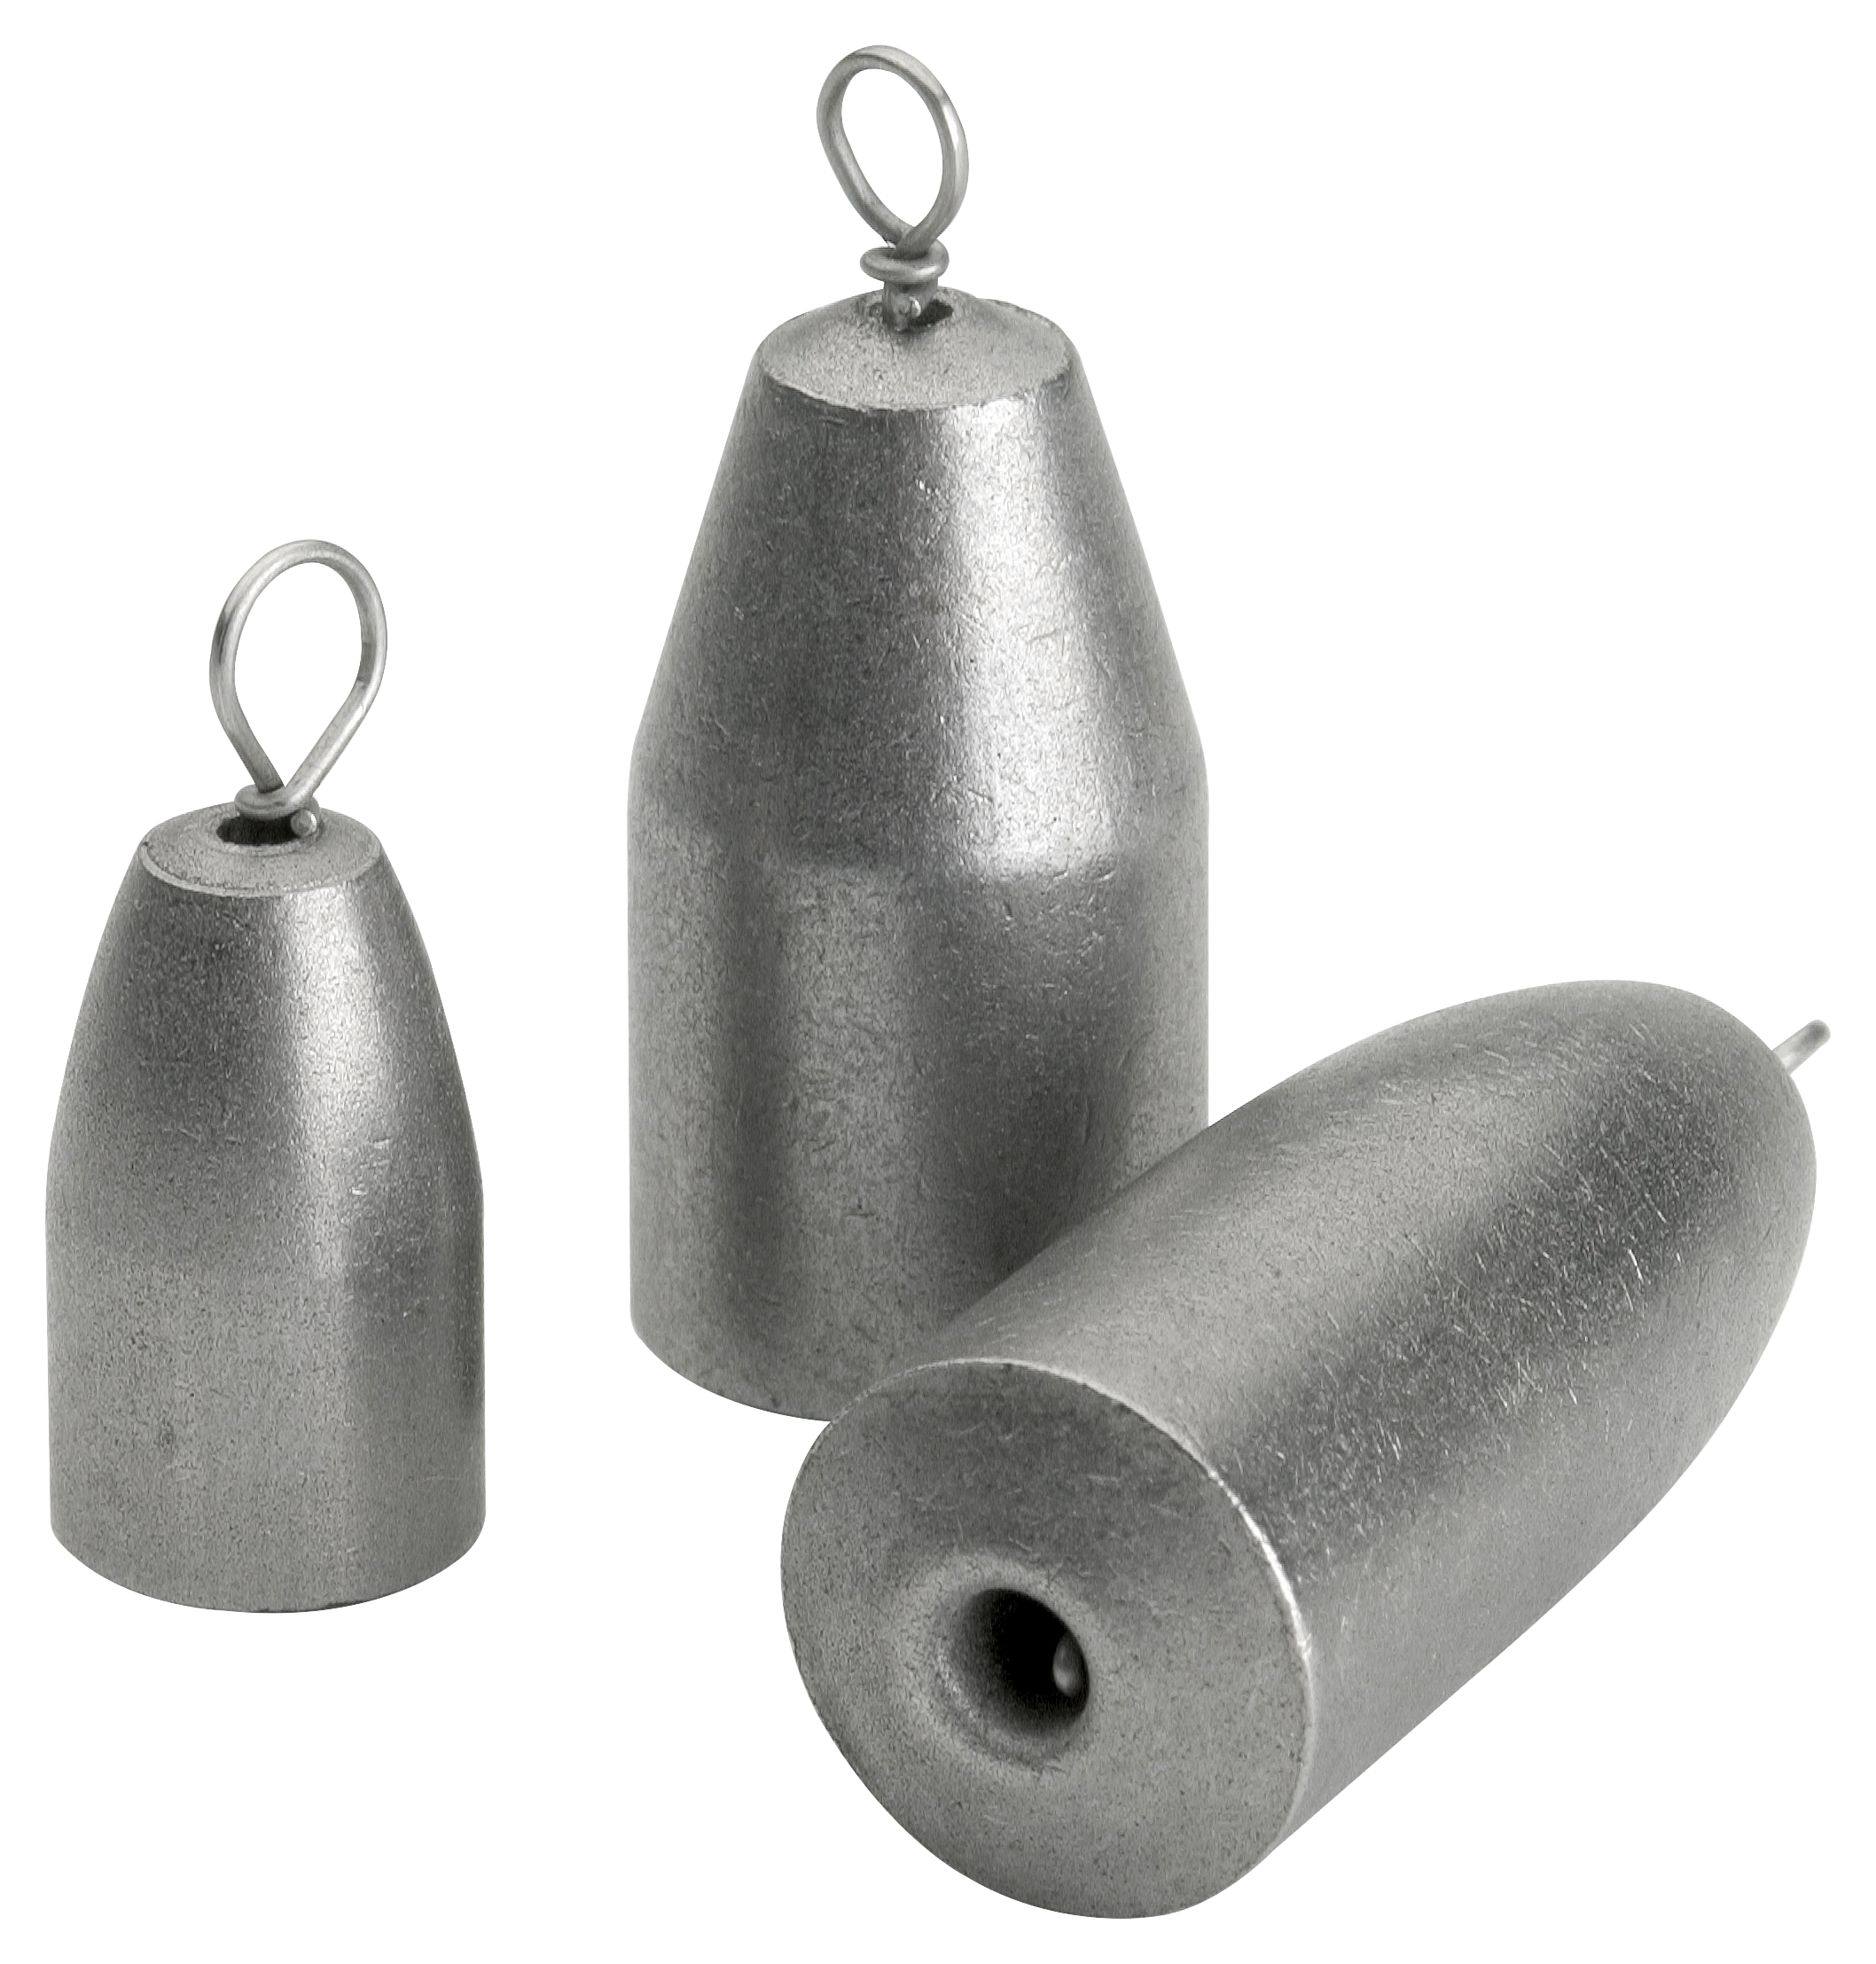 Bullet Weights Ultra Steel Bass Casting Sinkers - 1/4 oz.